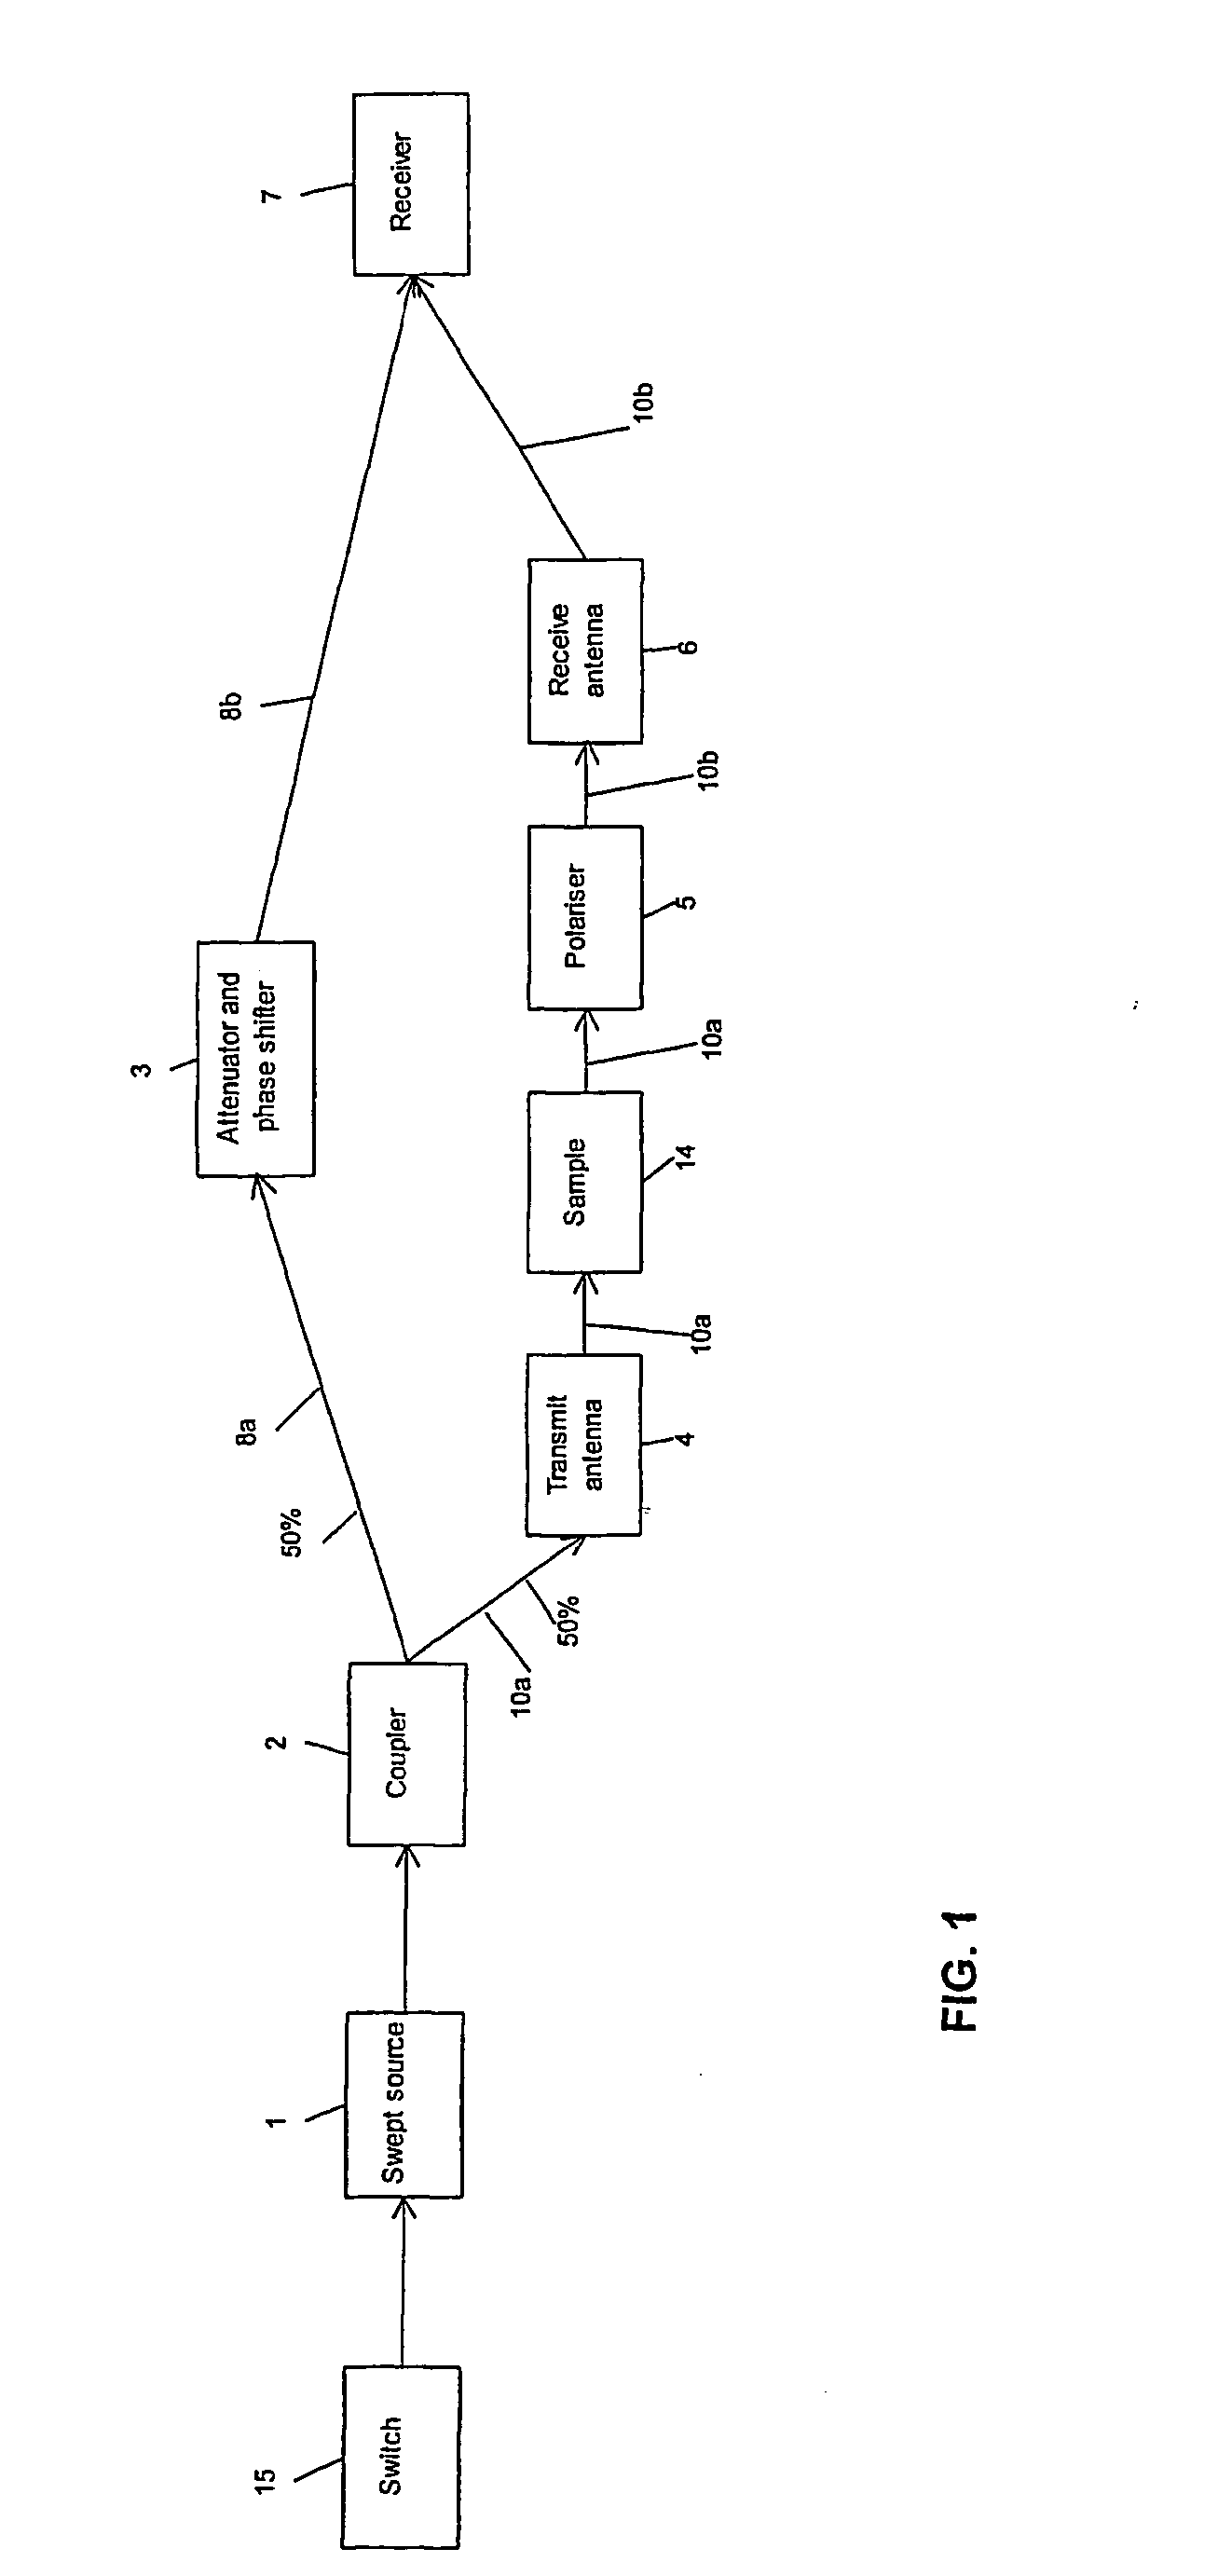 Apparatus and method for microwave determination of least one physical parameter of a substance